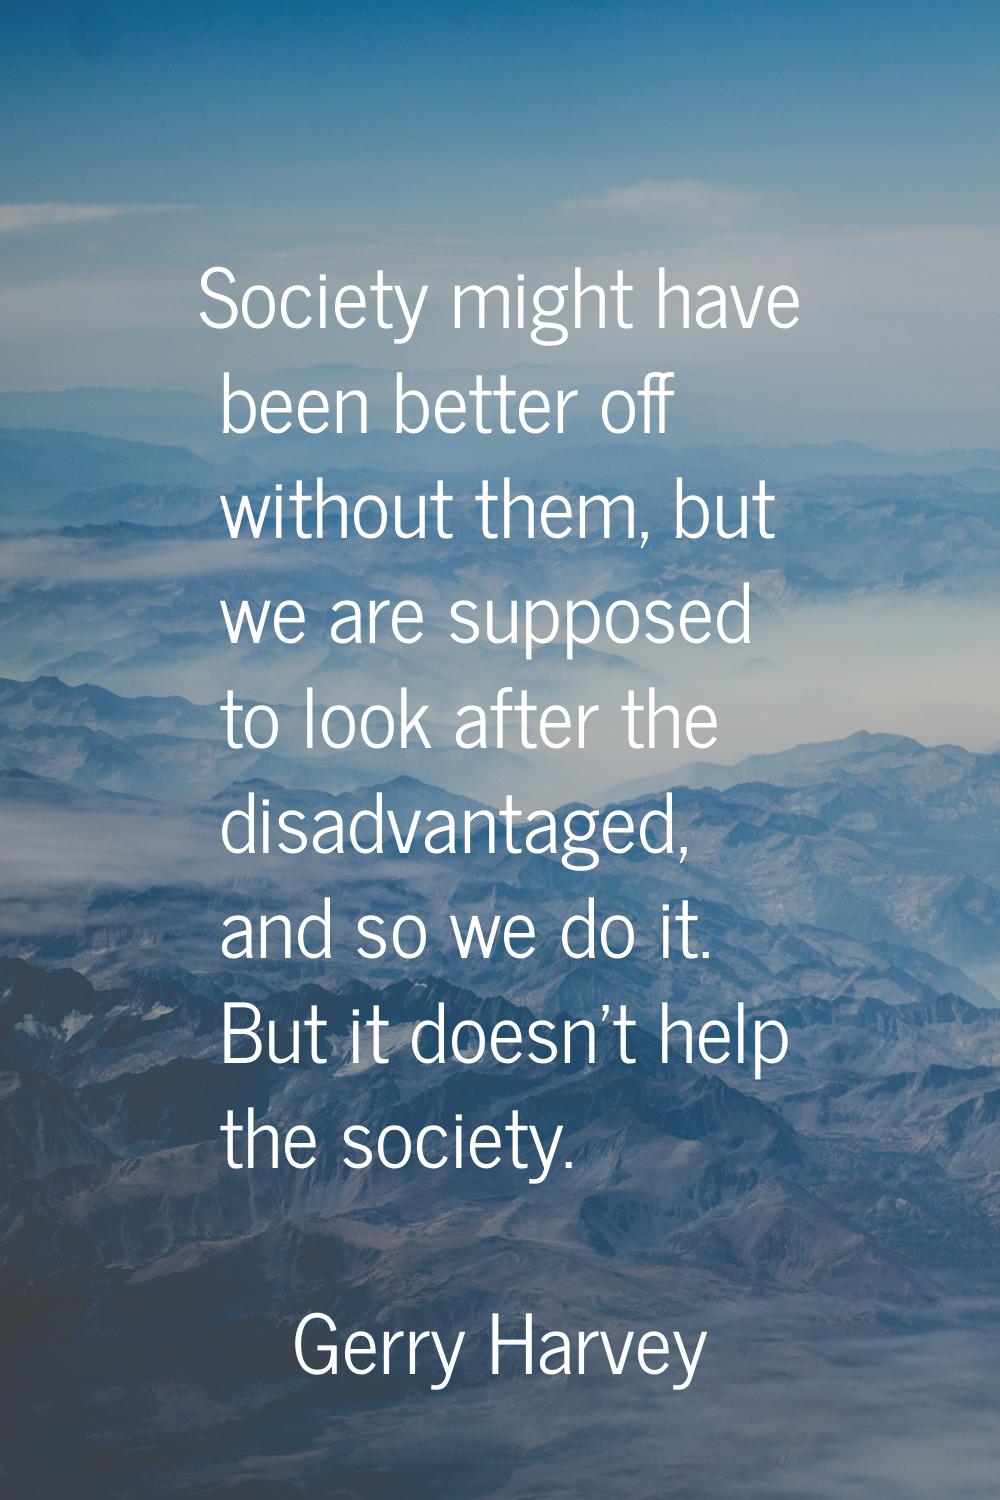 Society might have been better off without them, but we are supposed to look after the disadvantage